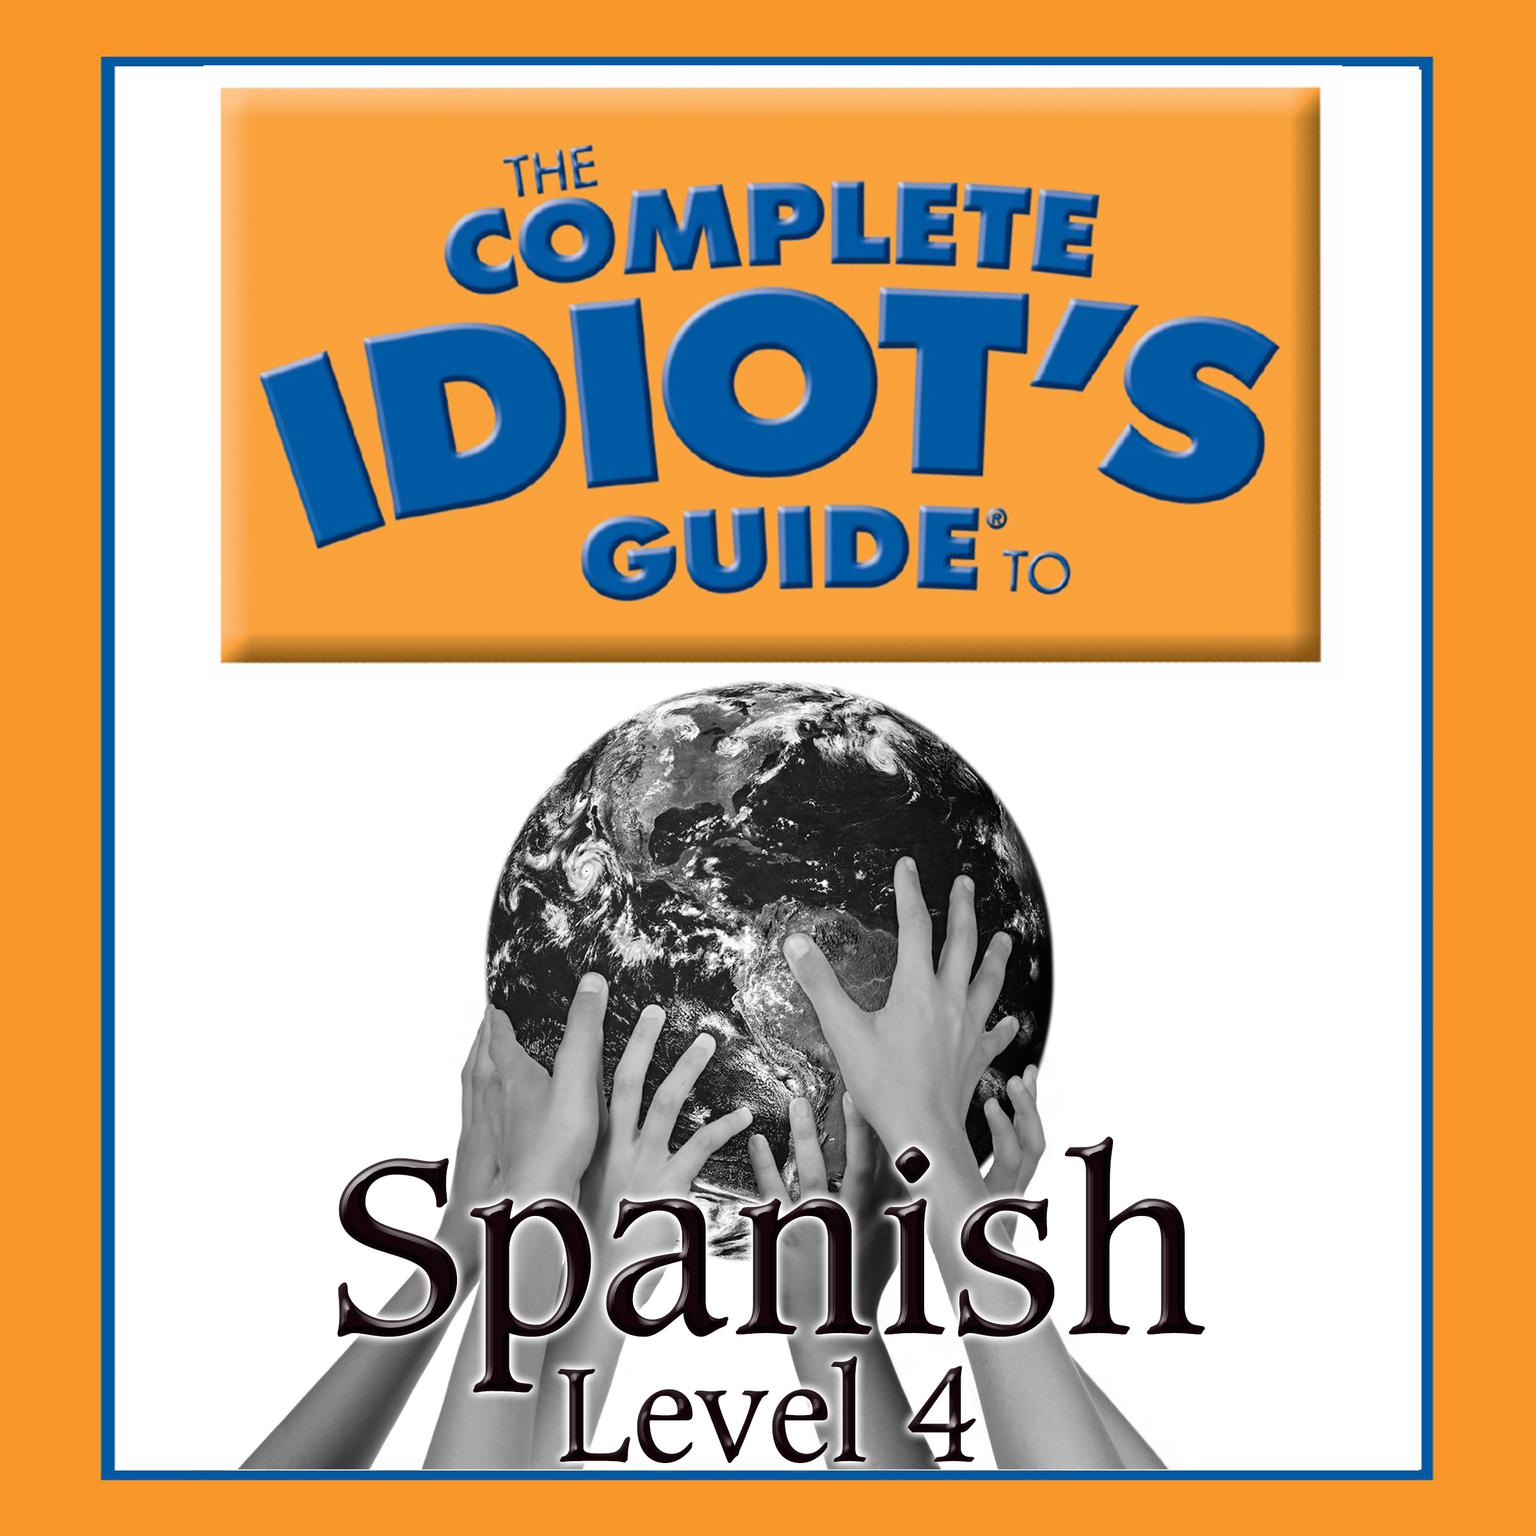 The Complete Idiot’s Guide to Spanish: Level 4 Audiobook, by Linguistics Team